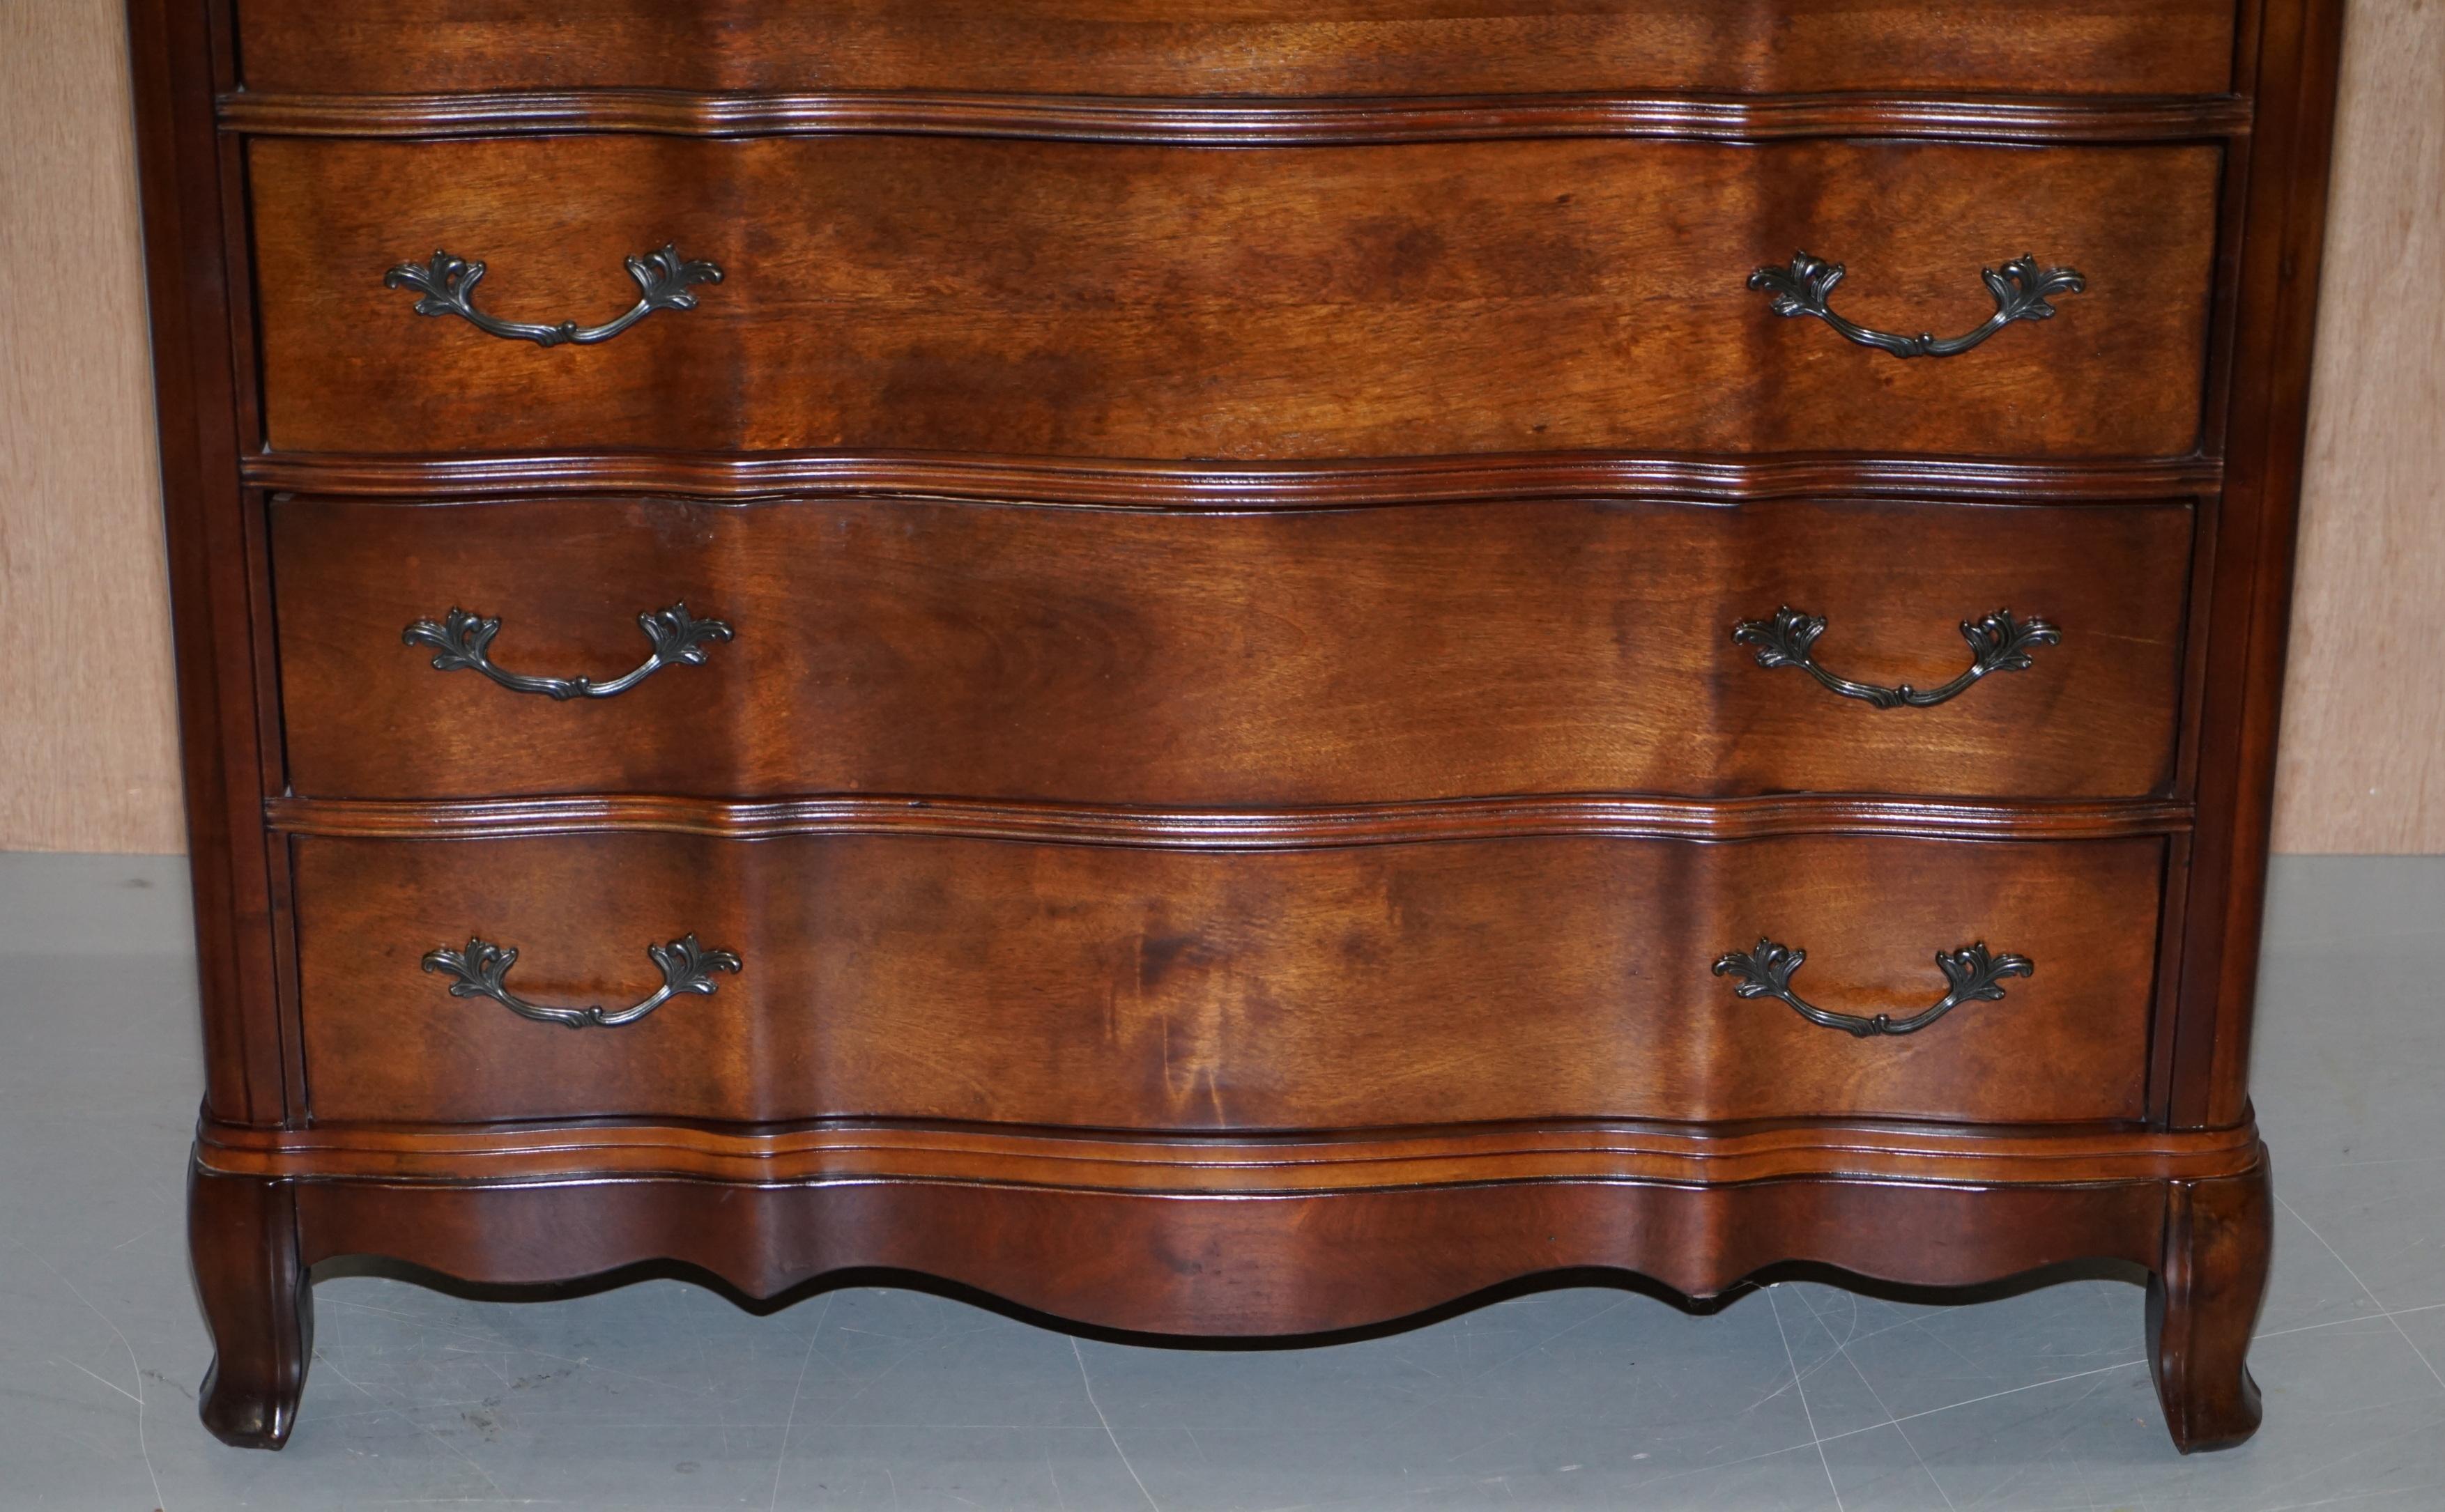 20th Century Larger Serpentine Fronted Ralph Lauren American Hardwood Chest of Drawers